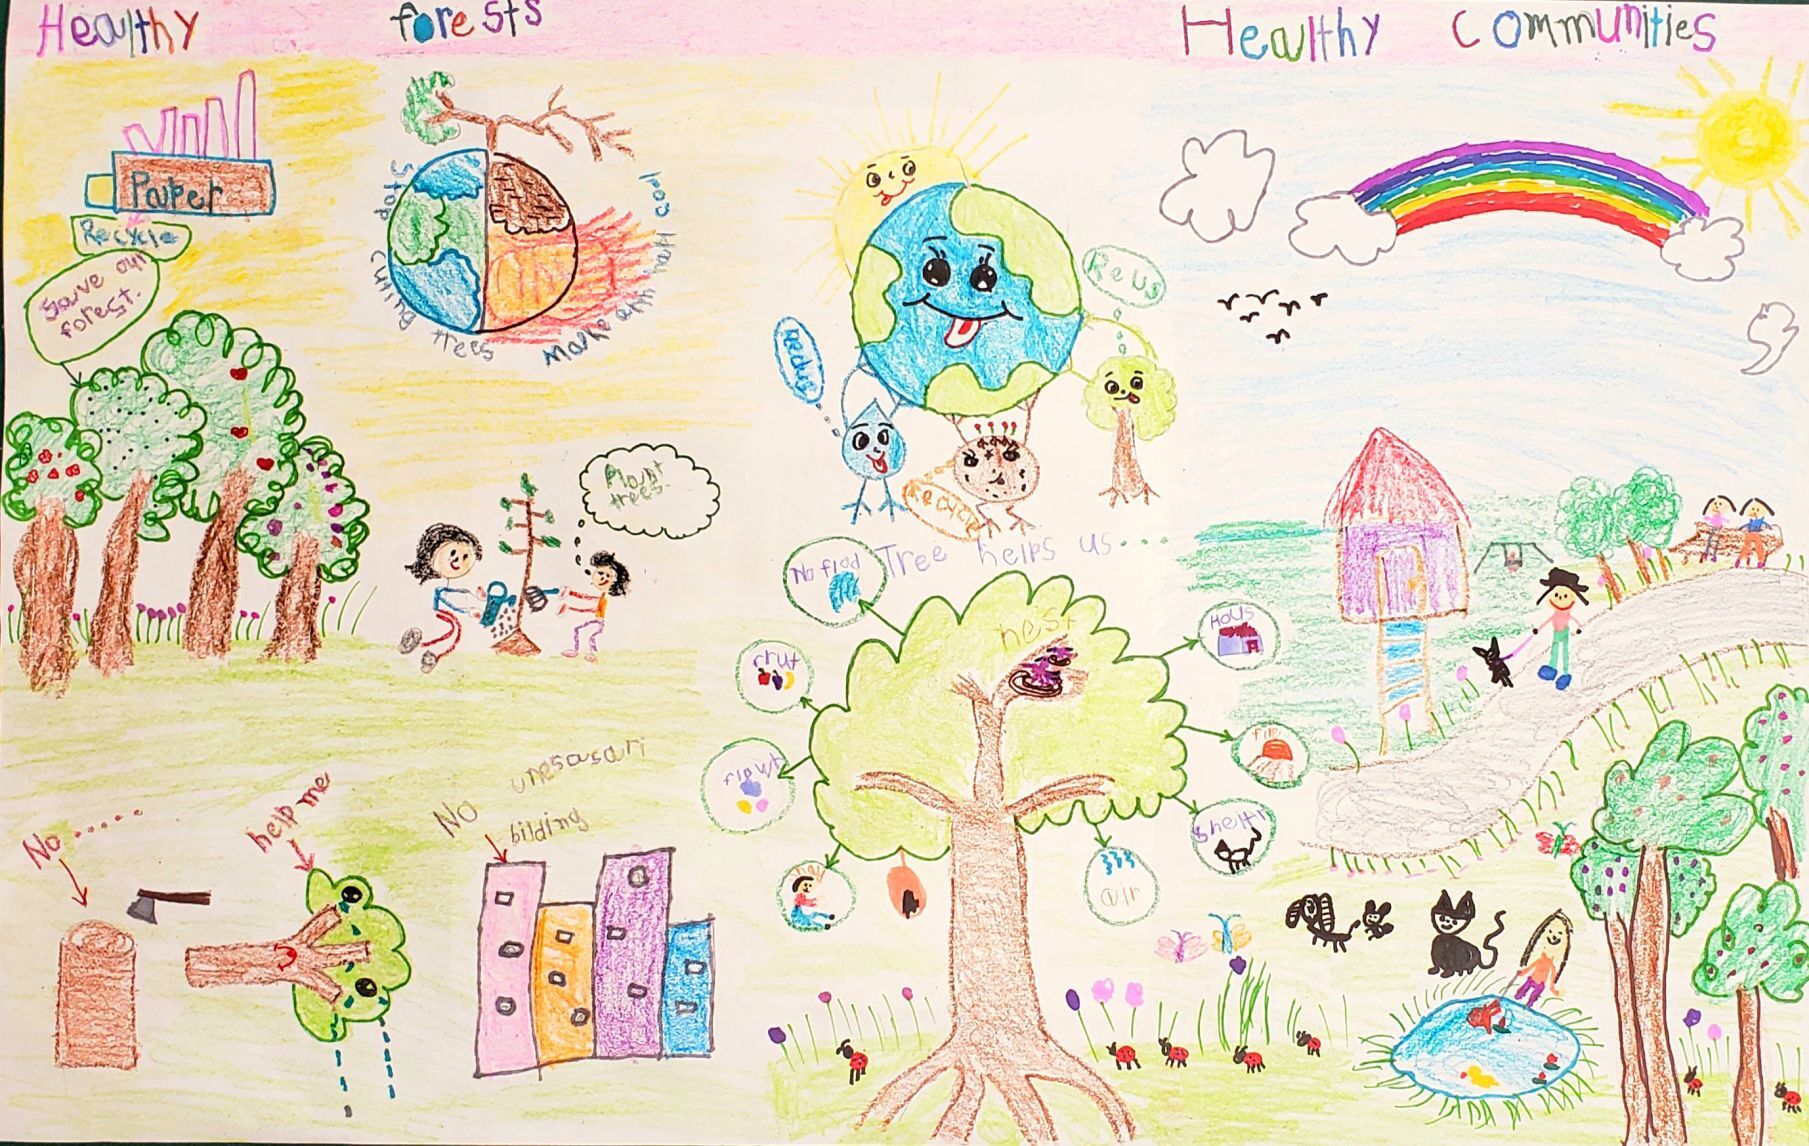 Conservation and Environmental Awareness Poster Contest seeks entrants